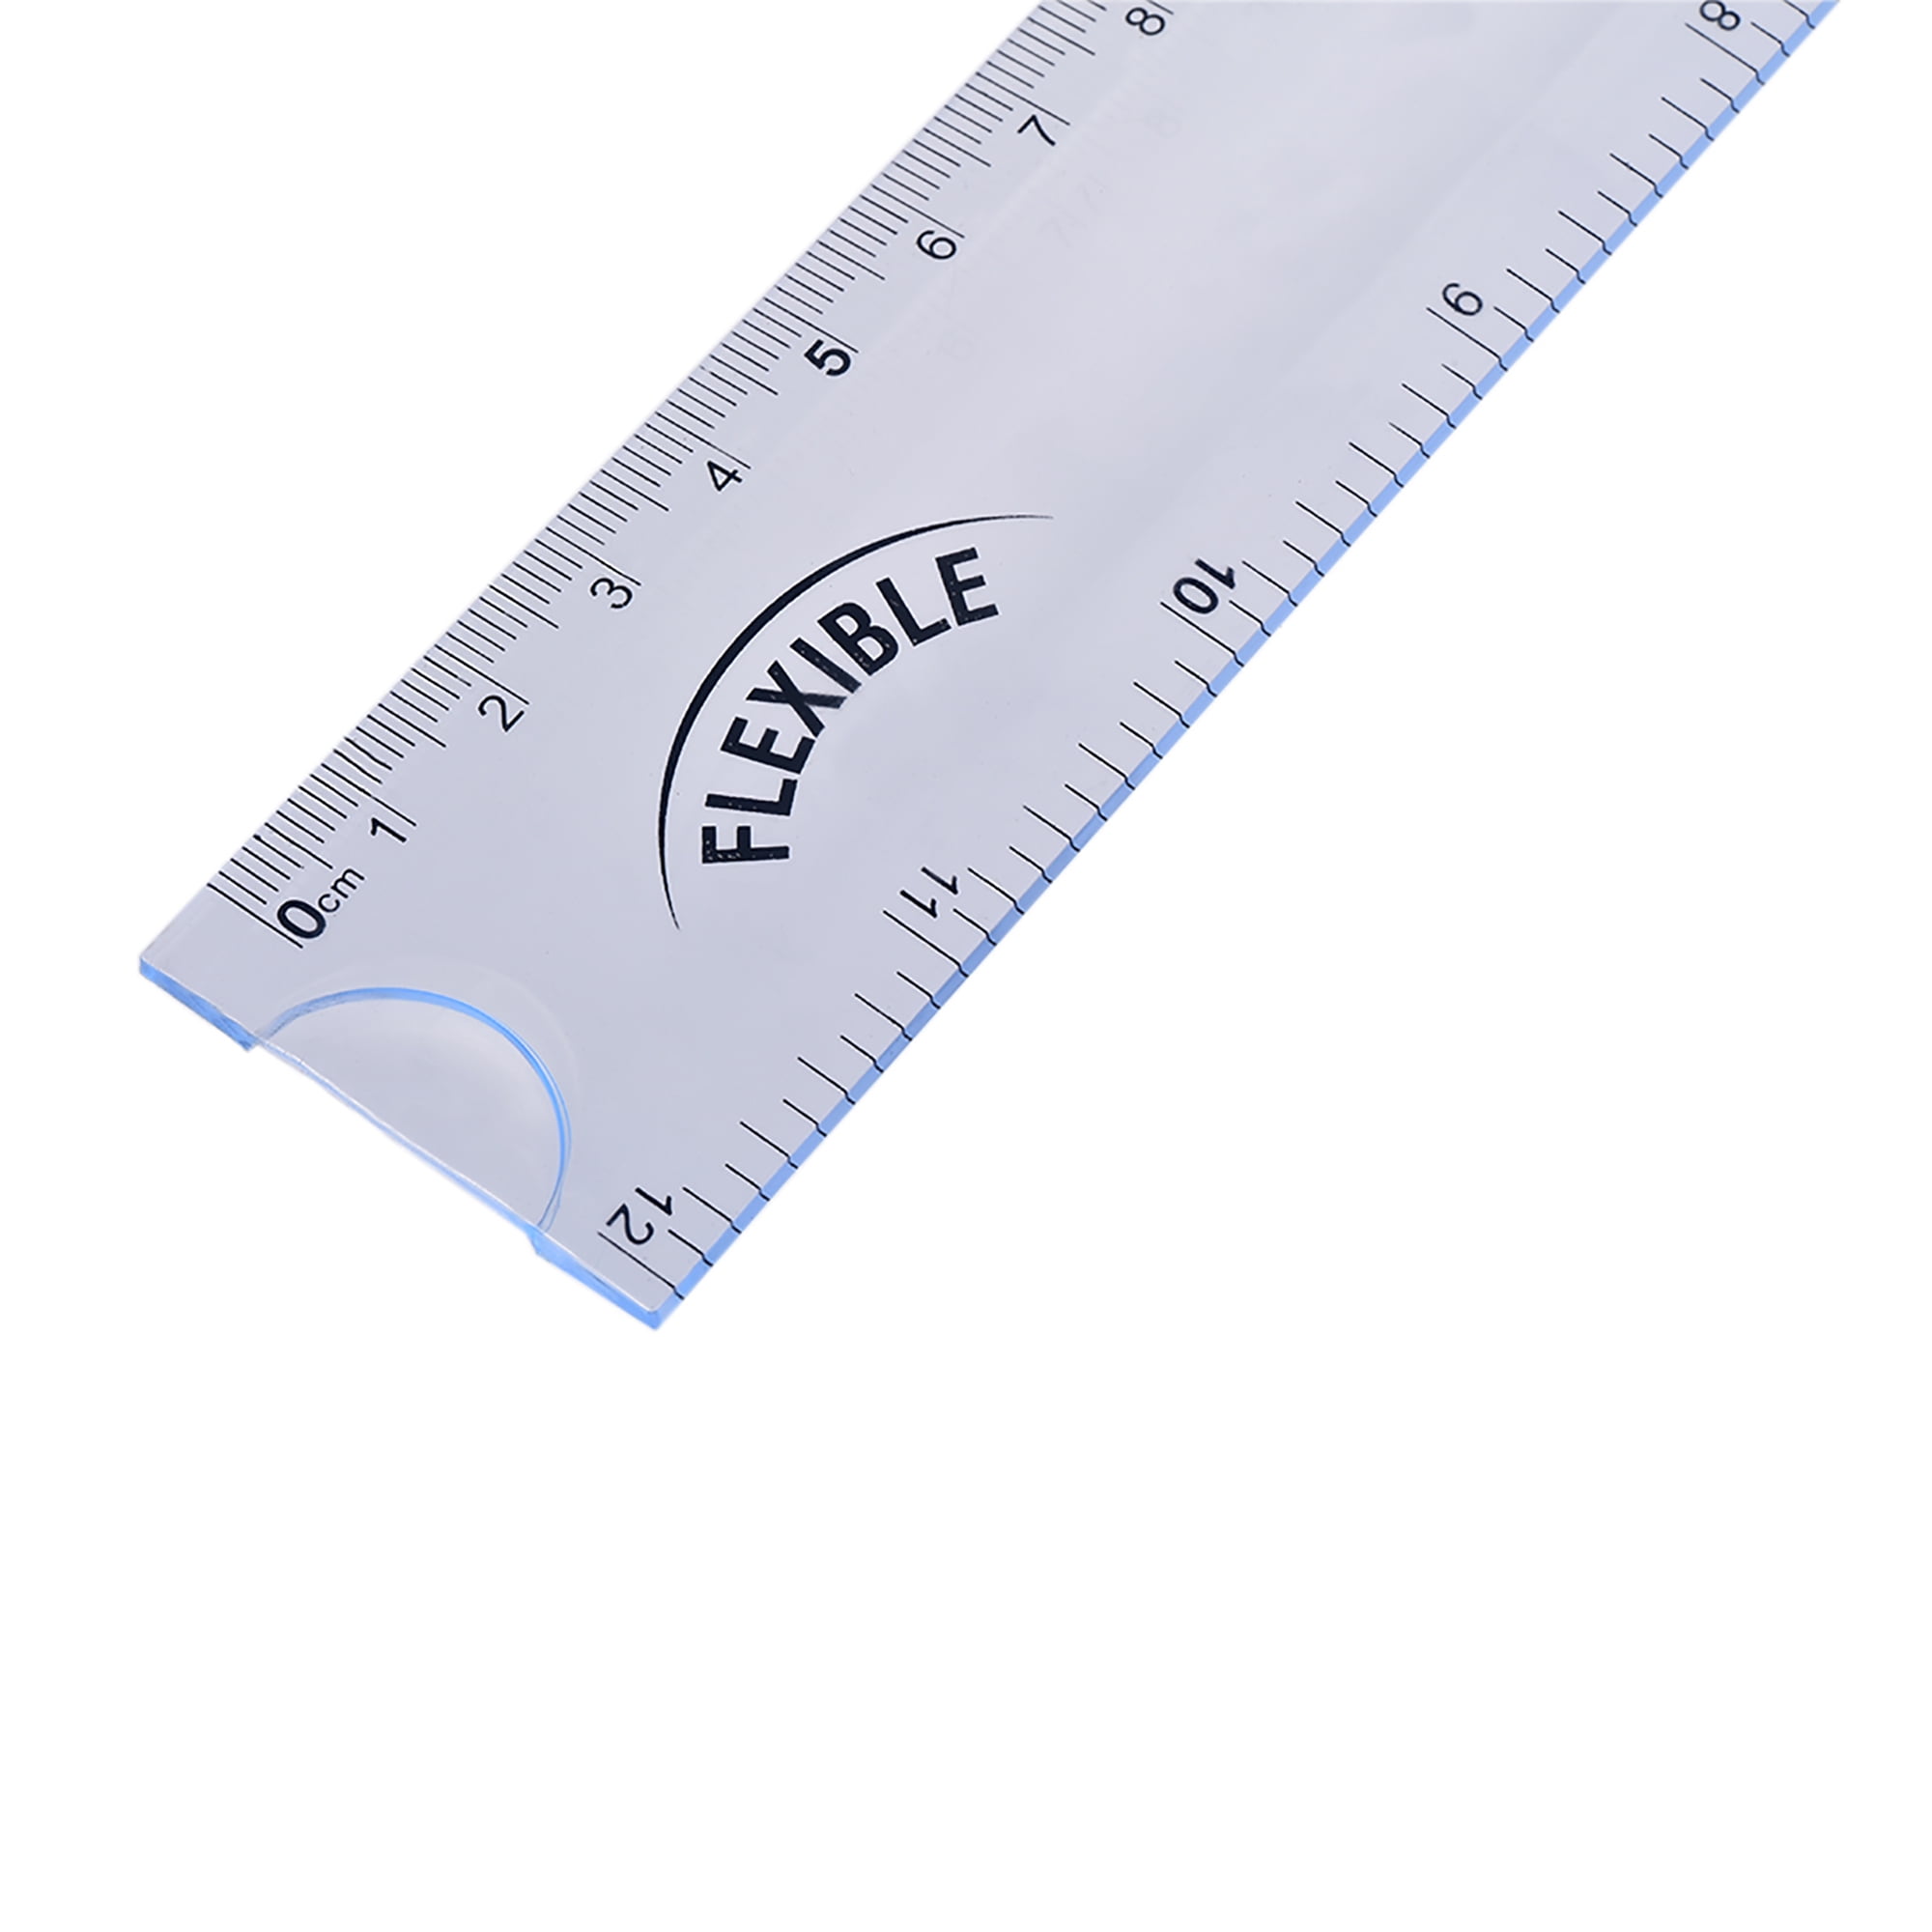 Enday Ruler Straight Edge Semi-Flexible 12 Inch Rulers for Kids and Adults  2 Pack (8 Pcs) 